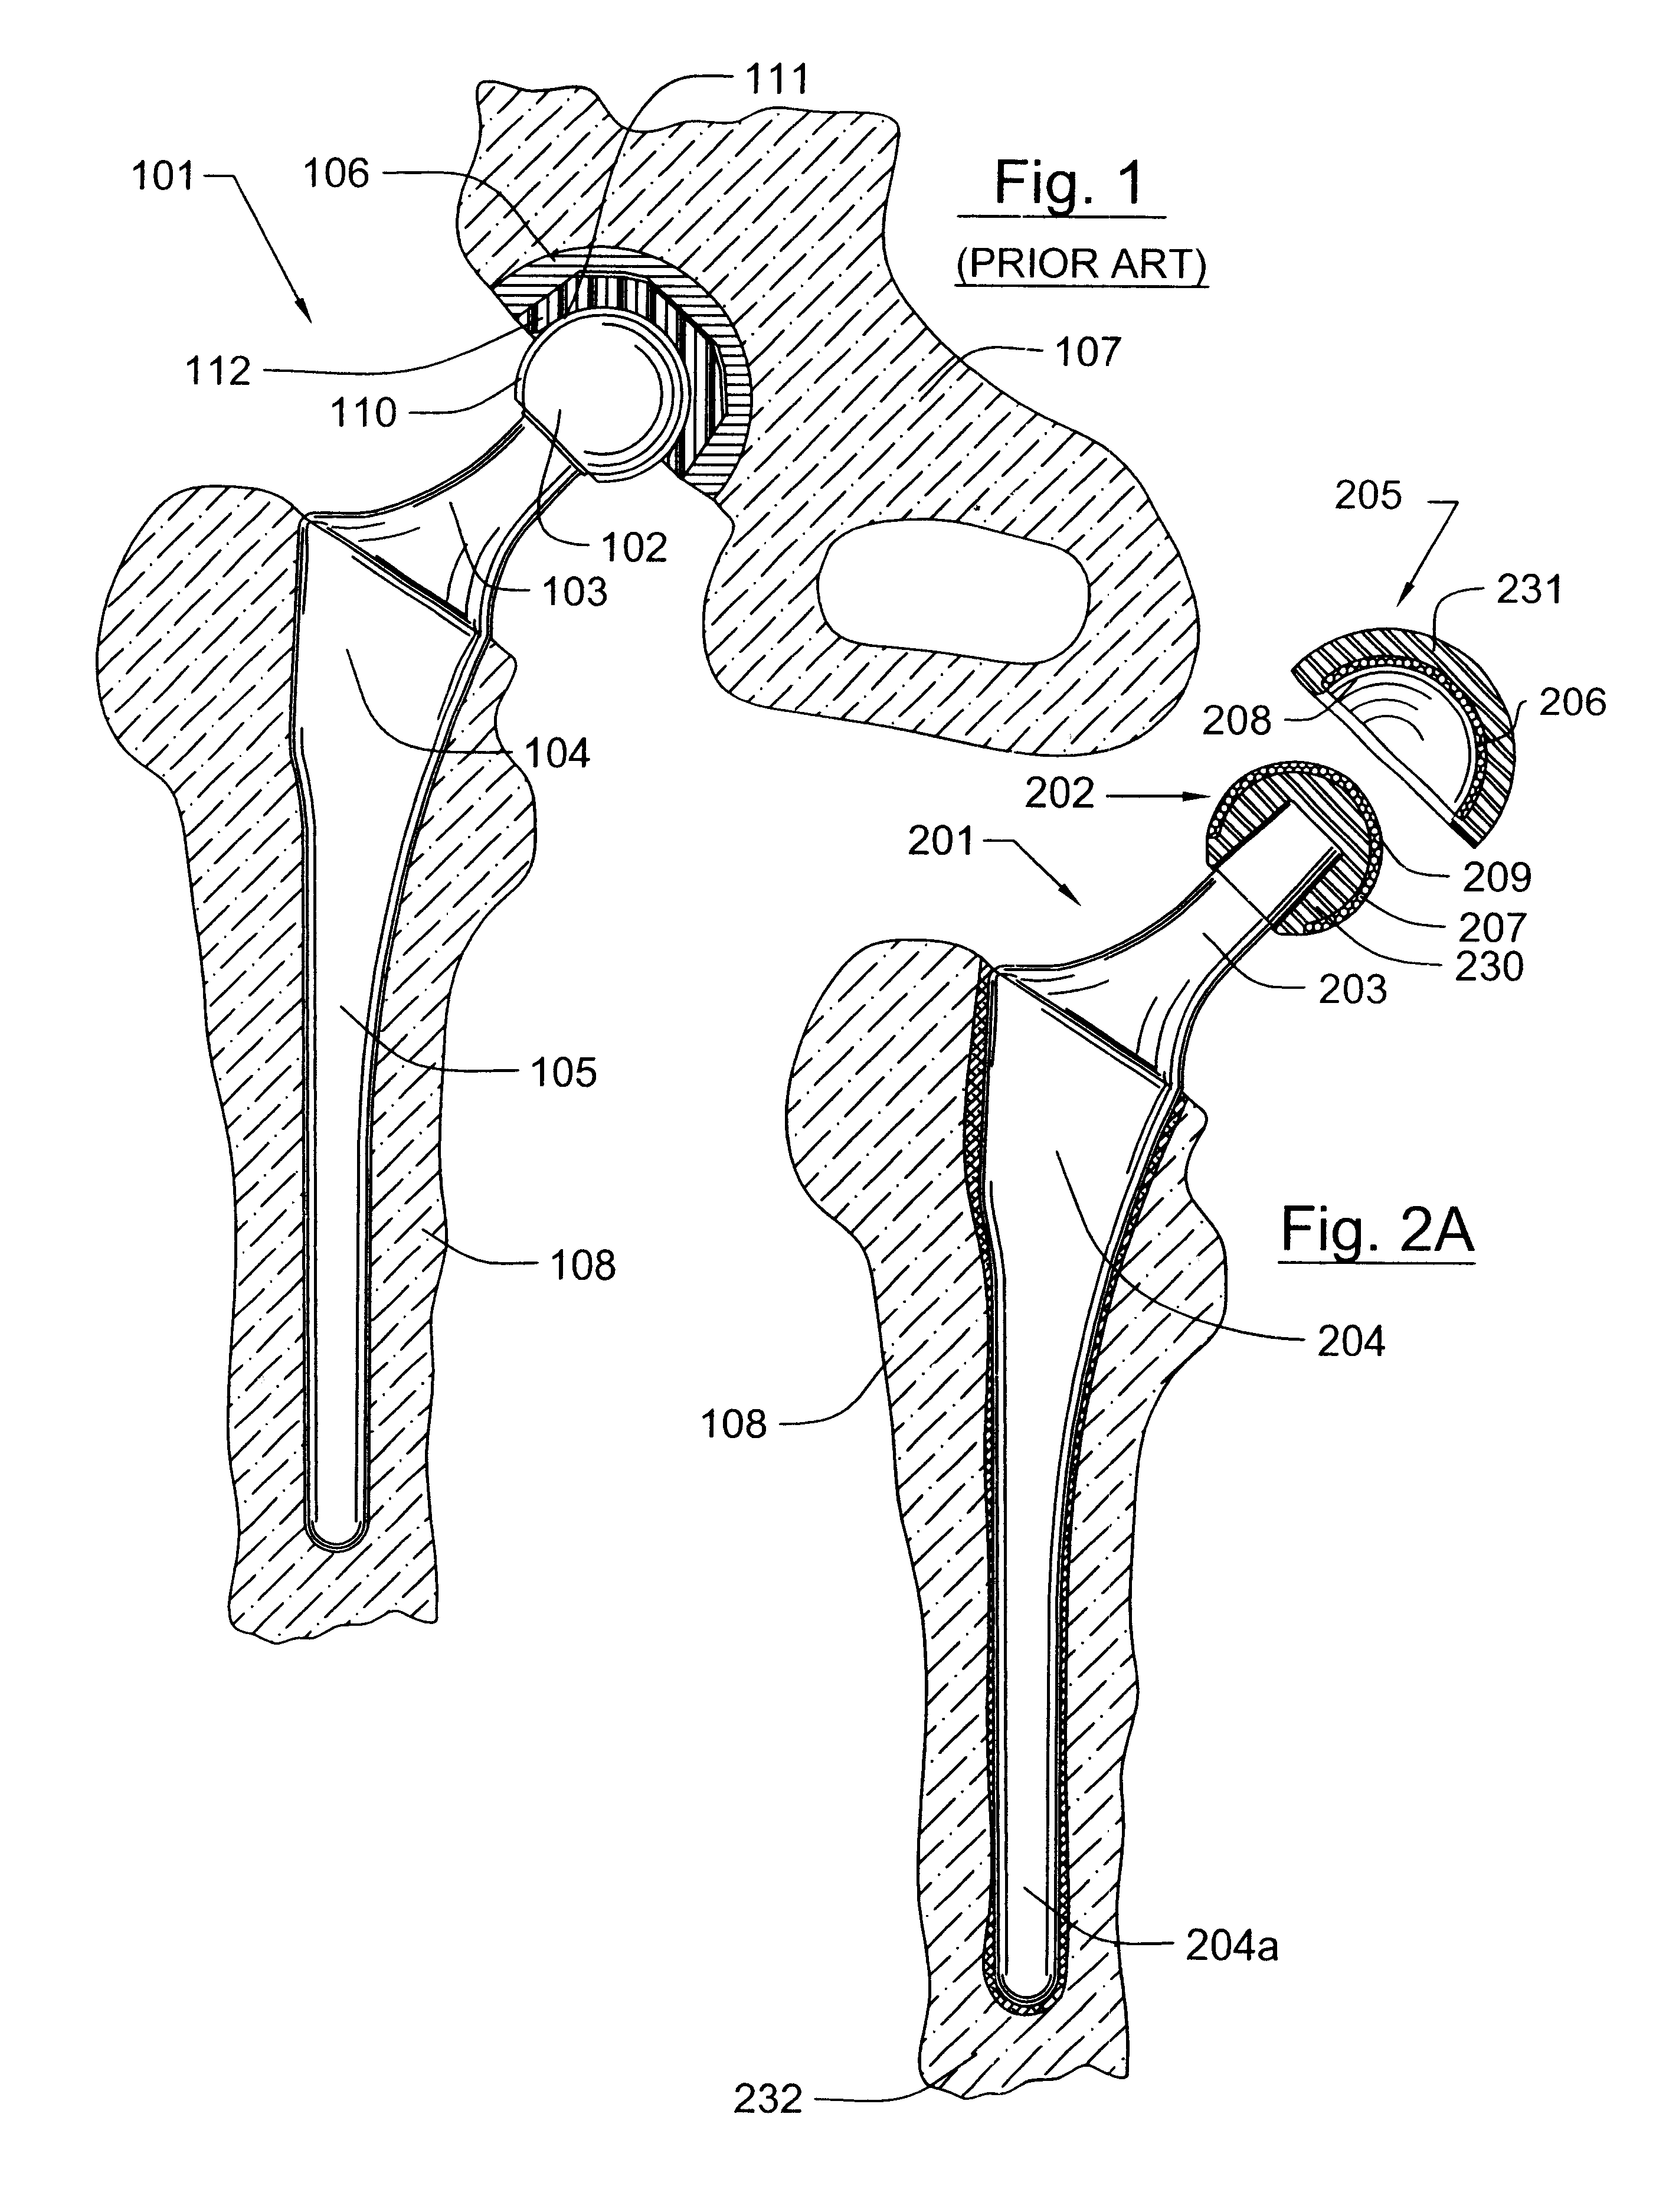 Prosthetic hip joint having at least one sintered polycrystalline diamond compact articulation surface and substrate surface topographical features in said polycrystalline diamond compact